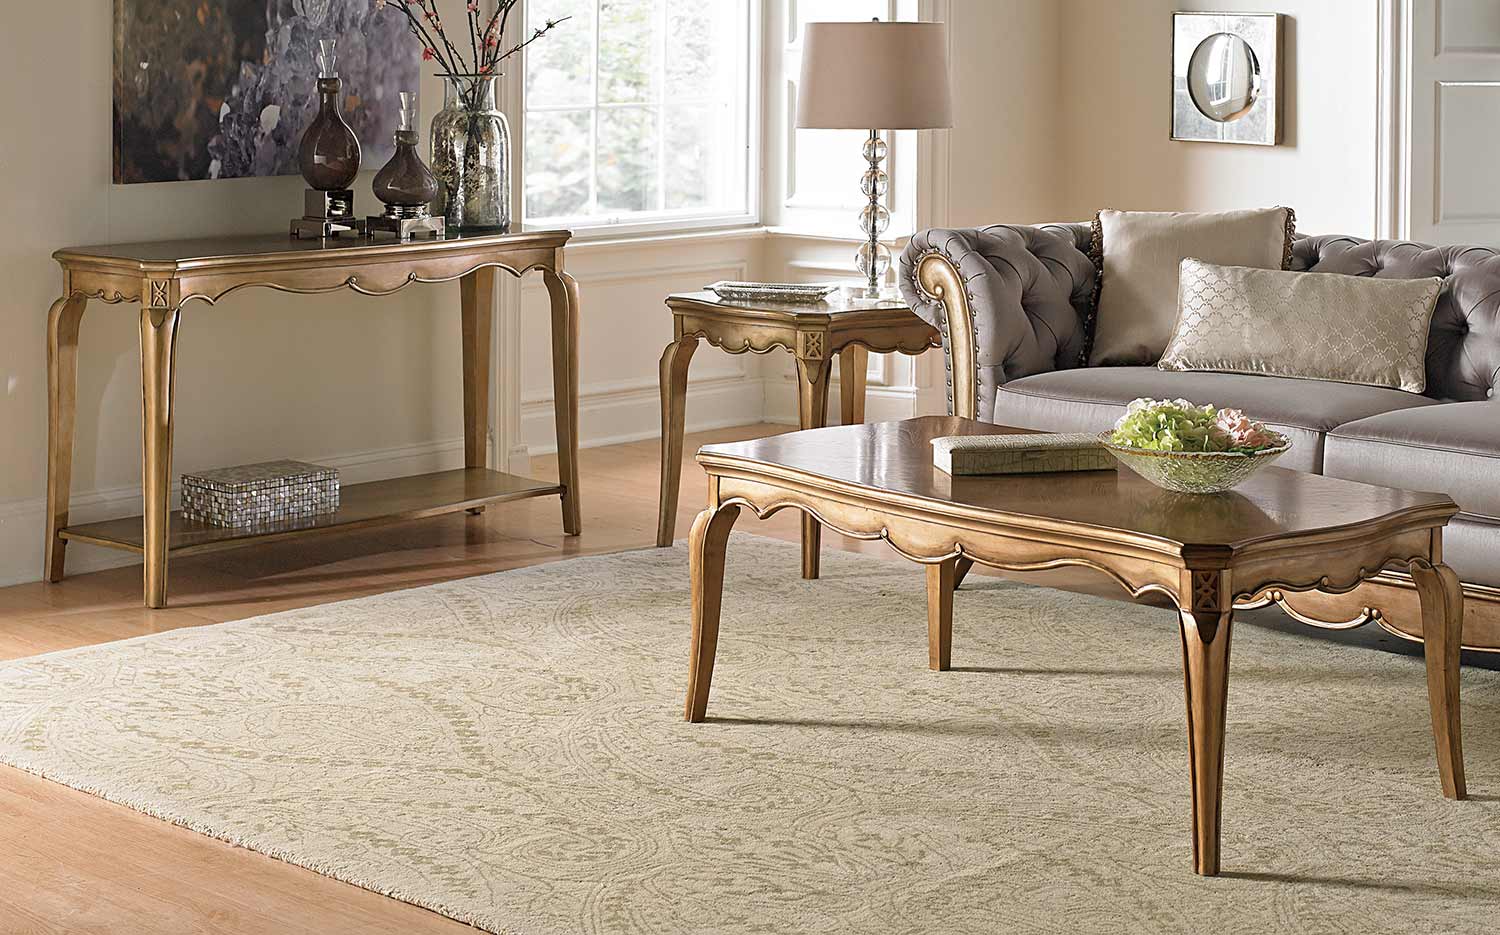 Homelegance Chambord Coffee Table Set - Champagne Gold